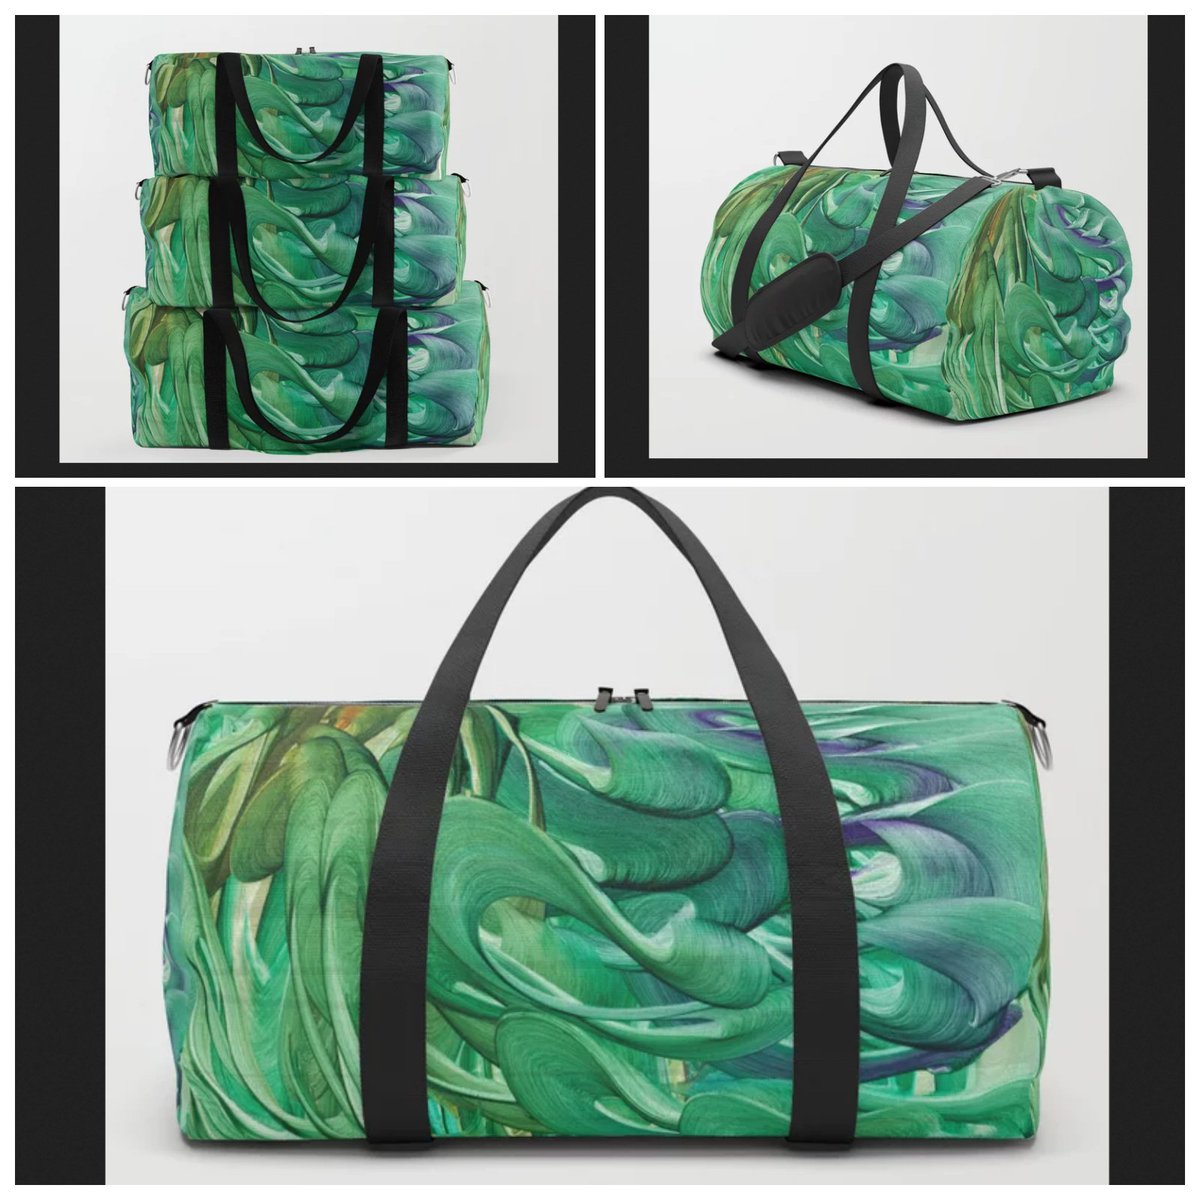 *SALE 30% Off*
Hare of Jade Duffle Bag~Art of Unique!~
#artfalaxy #art #totes #bags #fashion #society6 #designs #trendy #accessories #swirls #modern #gifts #pouches #makeup #duffel #backpacks #purple #teal #blue #green #yellow

society6.com/product/hare-o…